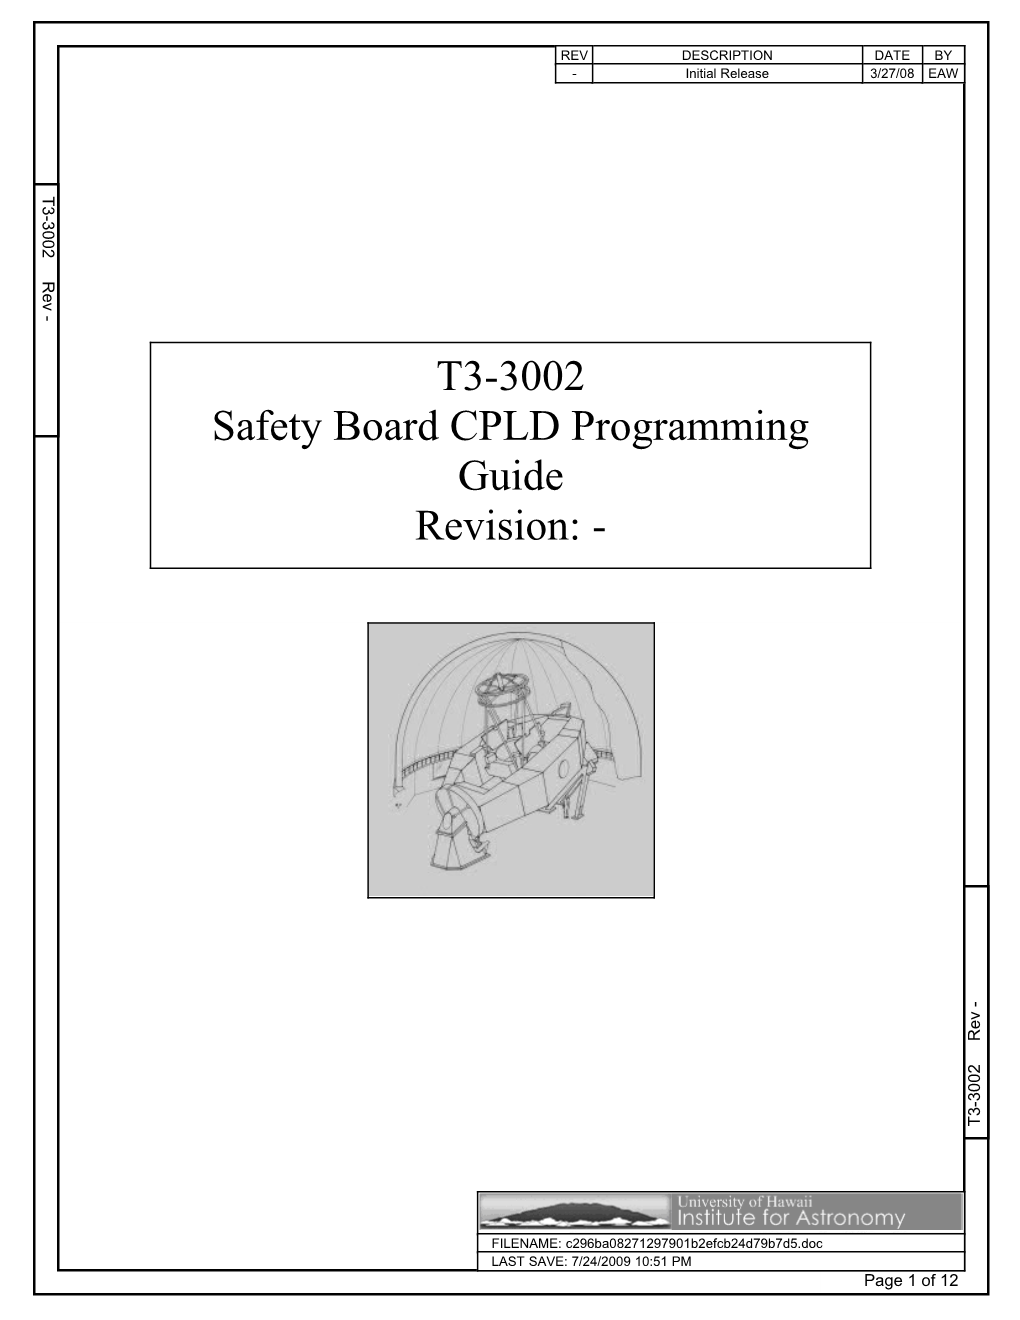 Safety Board CPLD Programming Guide